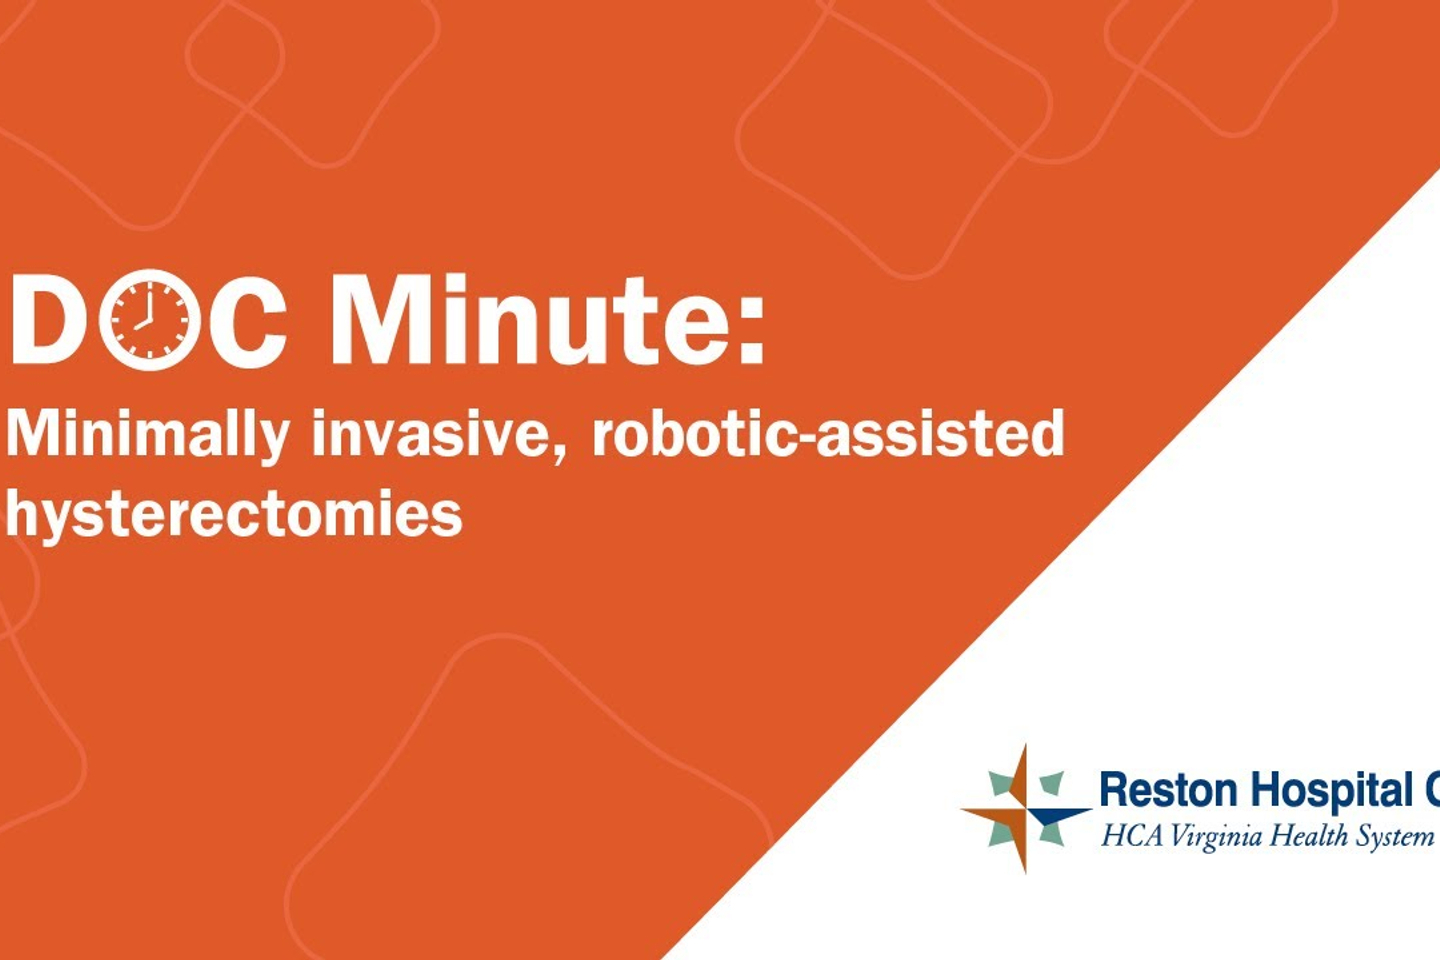 Doc Minute: Minimally invasive, robotic-assisted hysterectomies